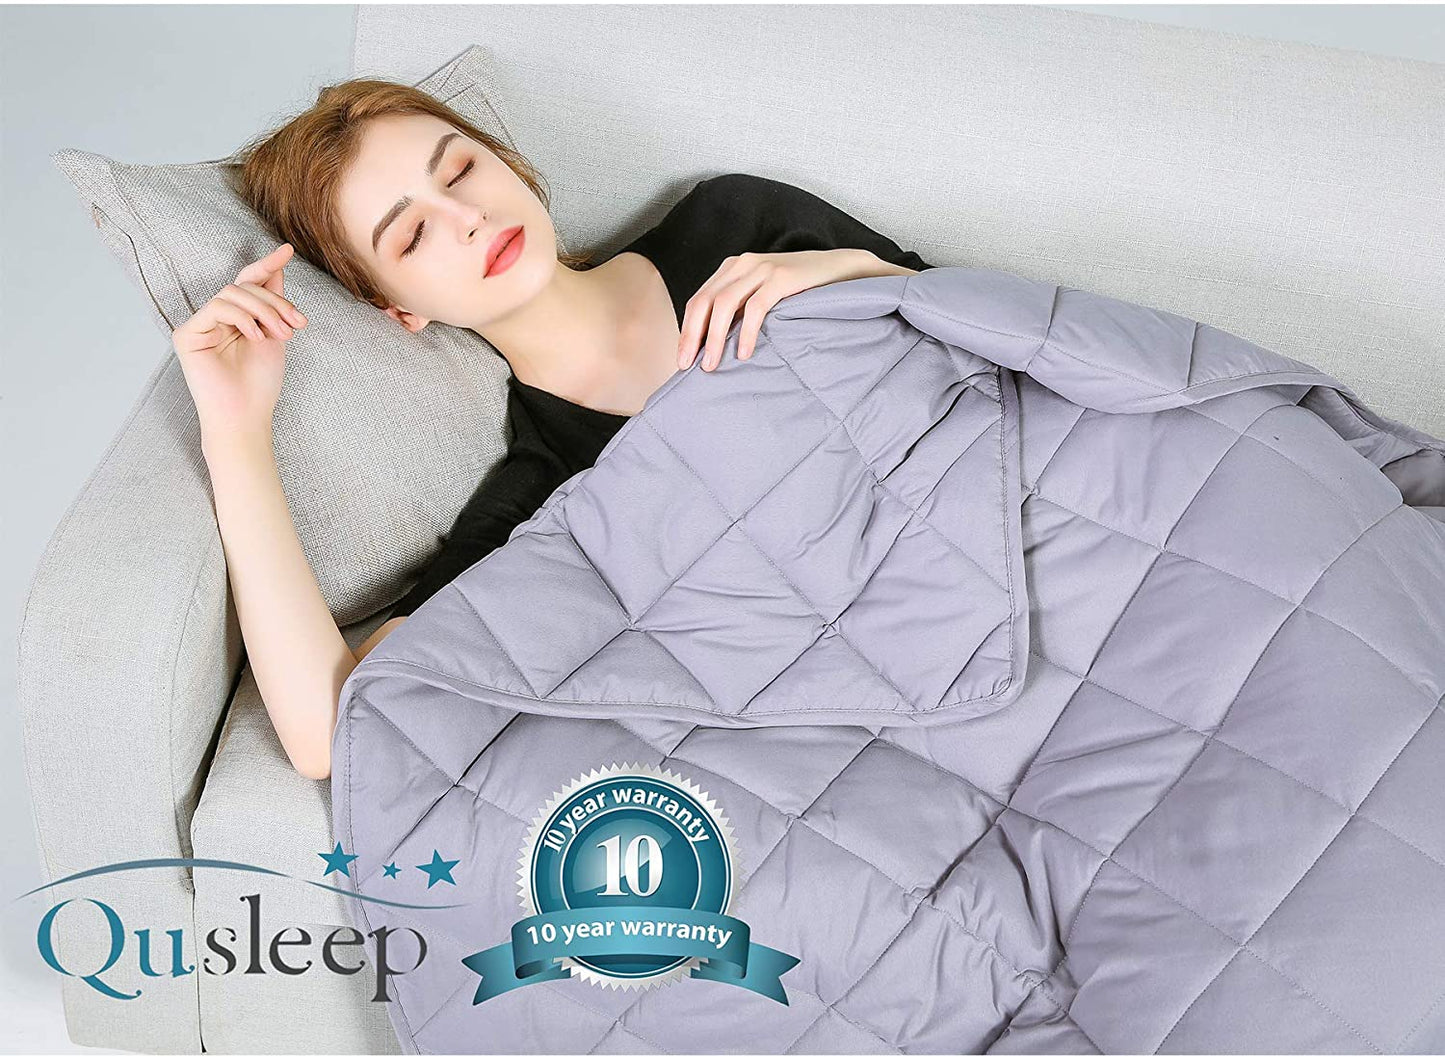 Cooling Weighted Blanket - 60''80'' 15LB Queen Size - Calm, Sleep Better and Relax Naturally for Adult and Kids